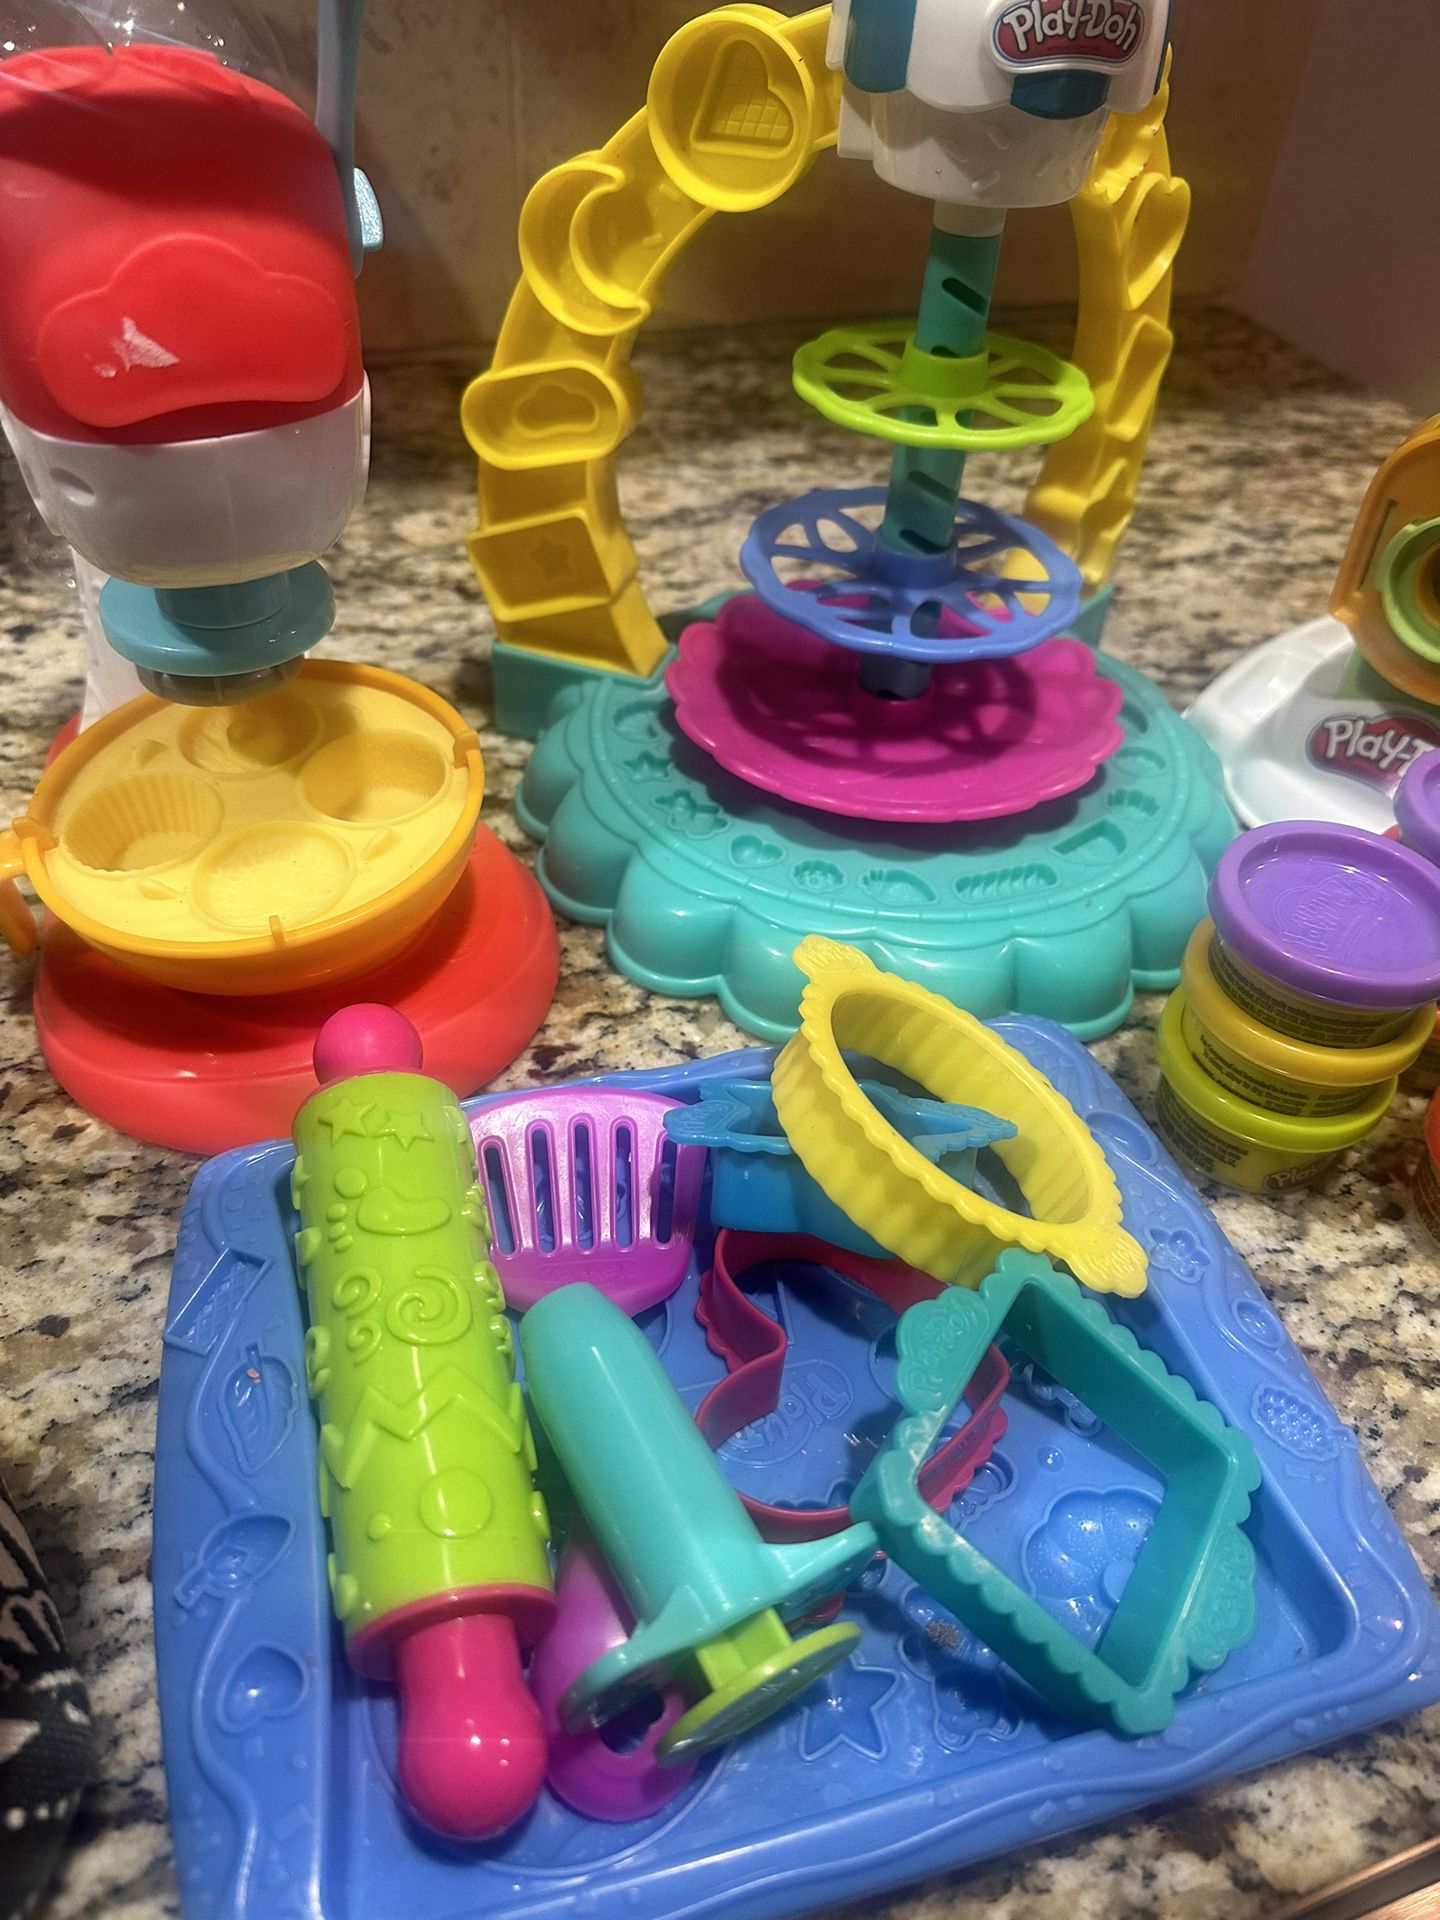 Play Doh Items